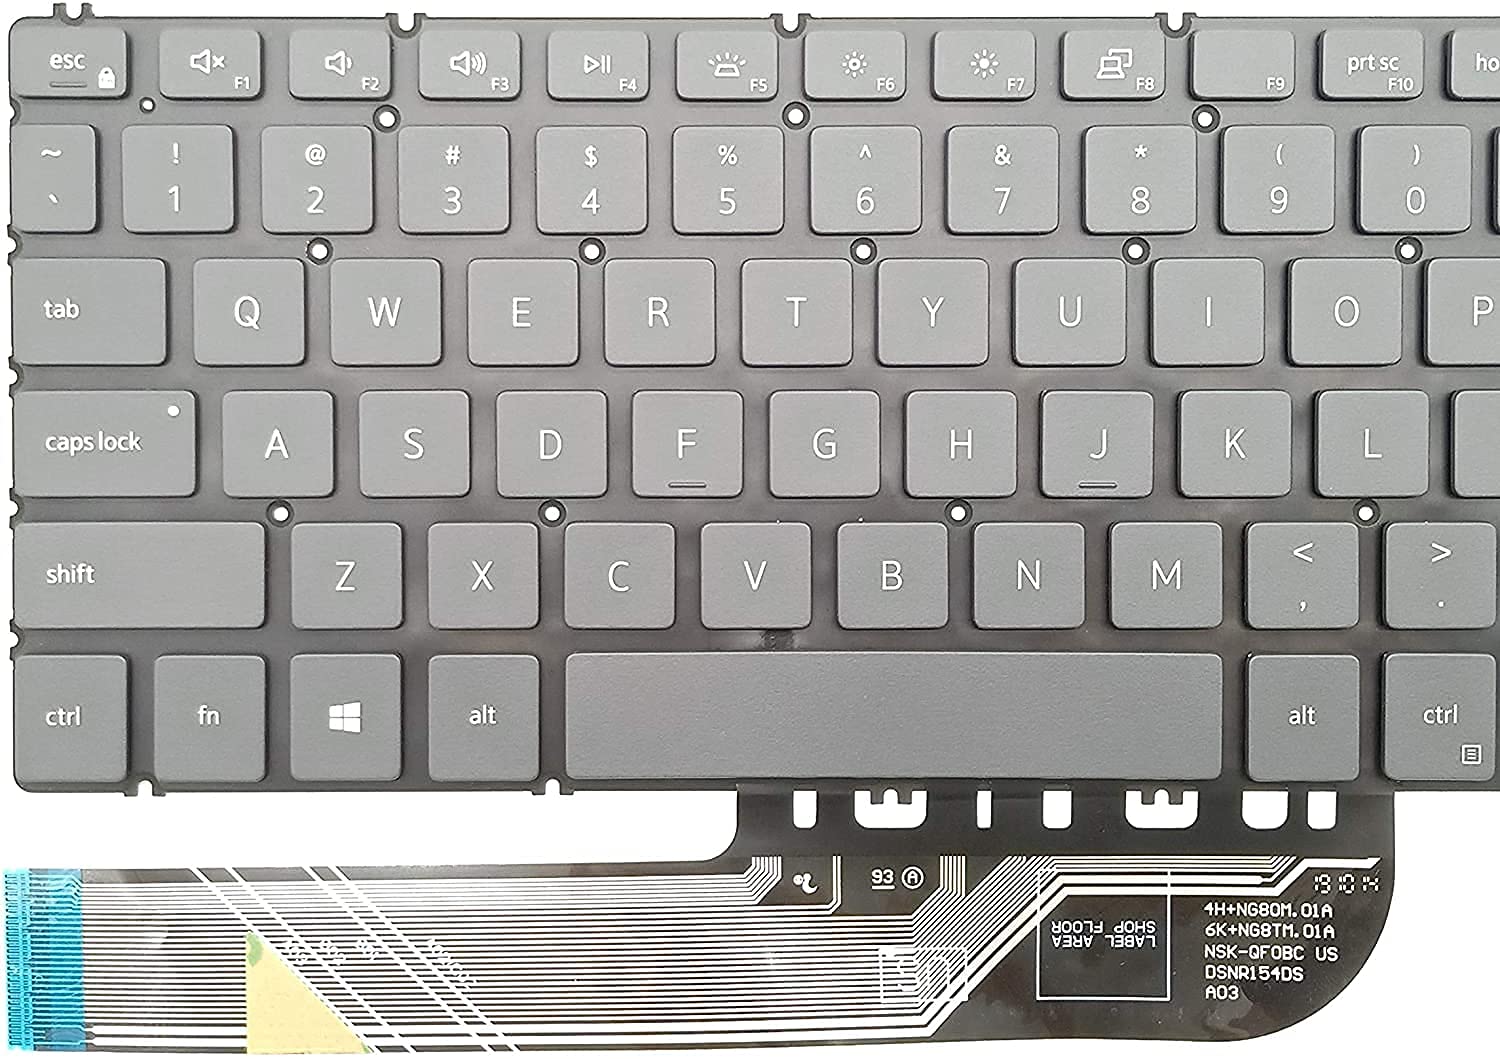 WISTAR Laptop Keyboard Compatible for Dell inspiron 5501 5502 5508 5584 5590 5591 5593 5594 5598, 7500 7501 7590 7591 Series : P42E P88F P90F